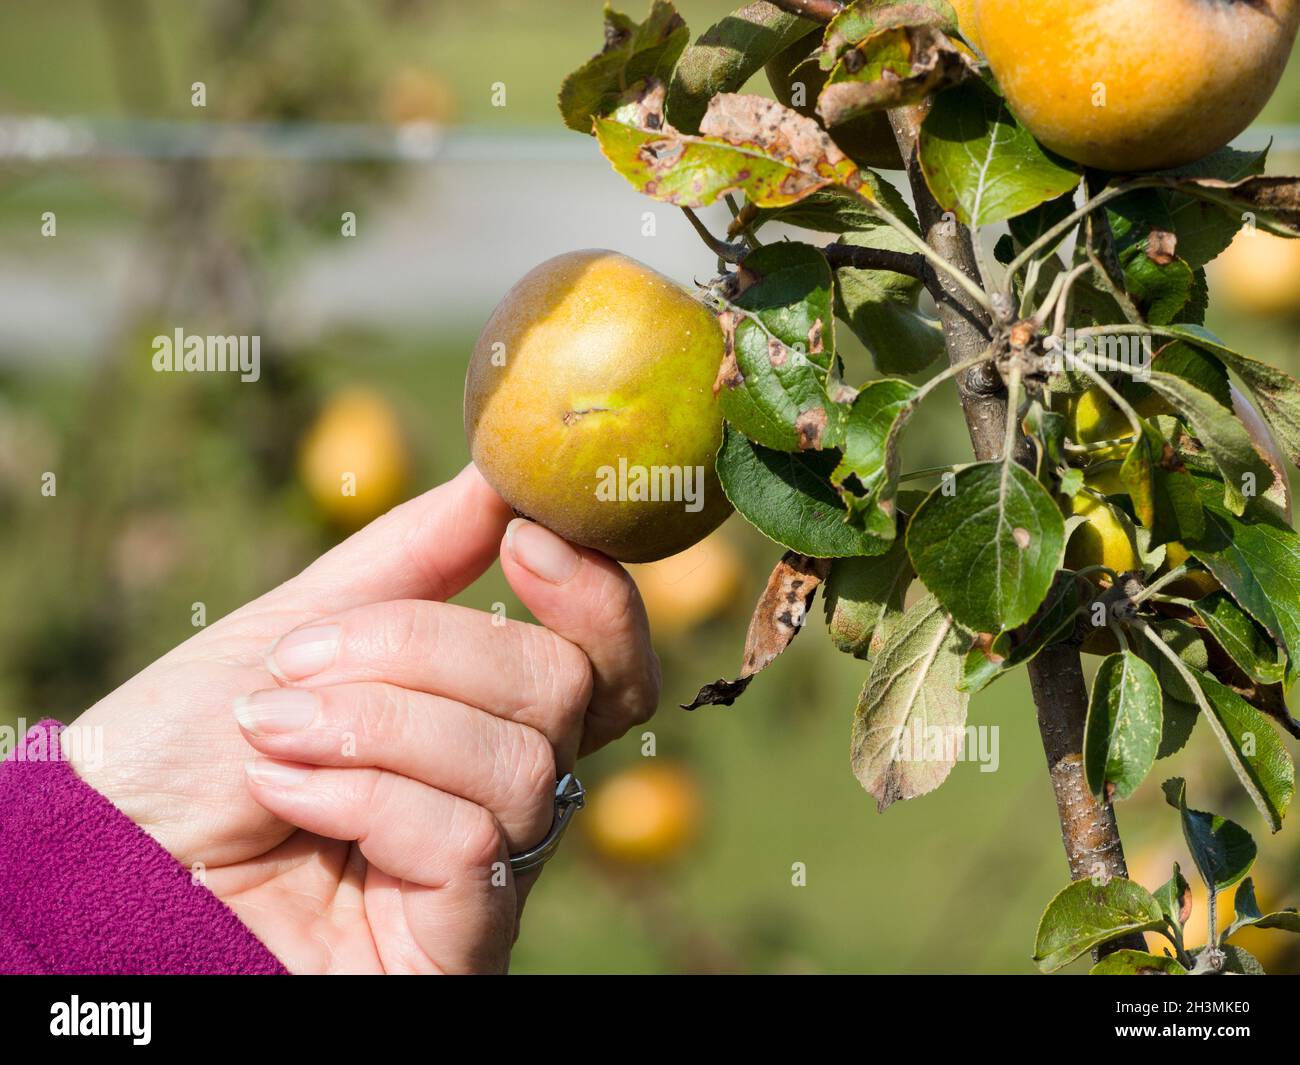 Picking a ripe but blemished Russet apple: A woman reaches for a slightly blemished russet apple on a tree branch in the afternoon sun. Stock Photo